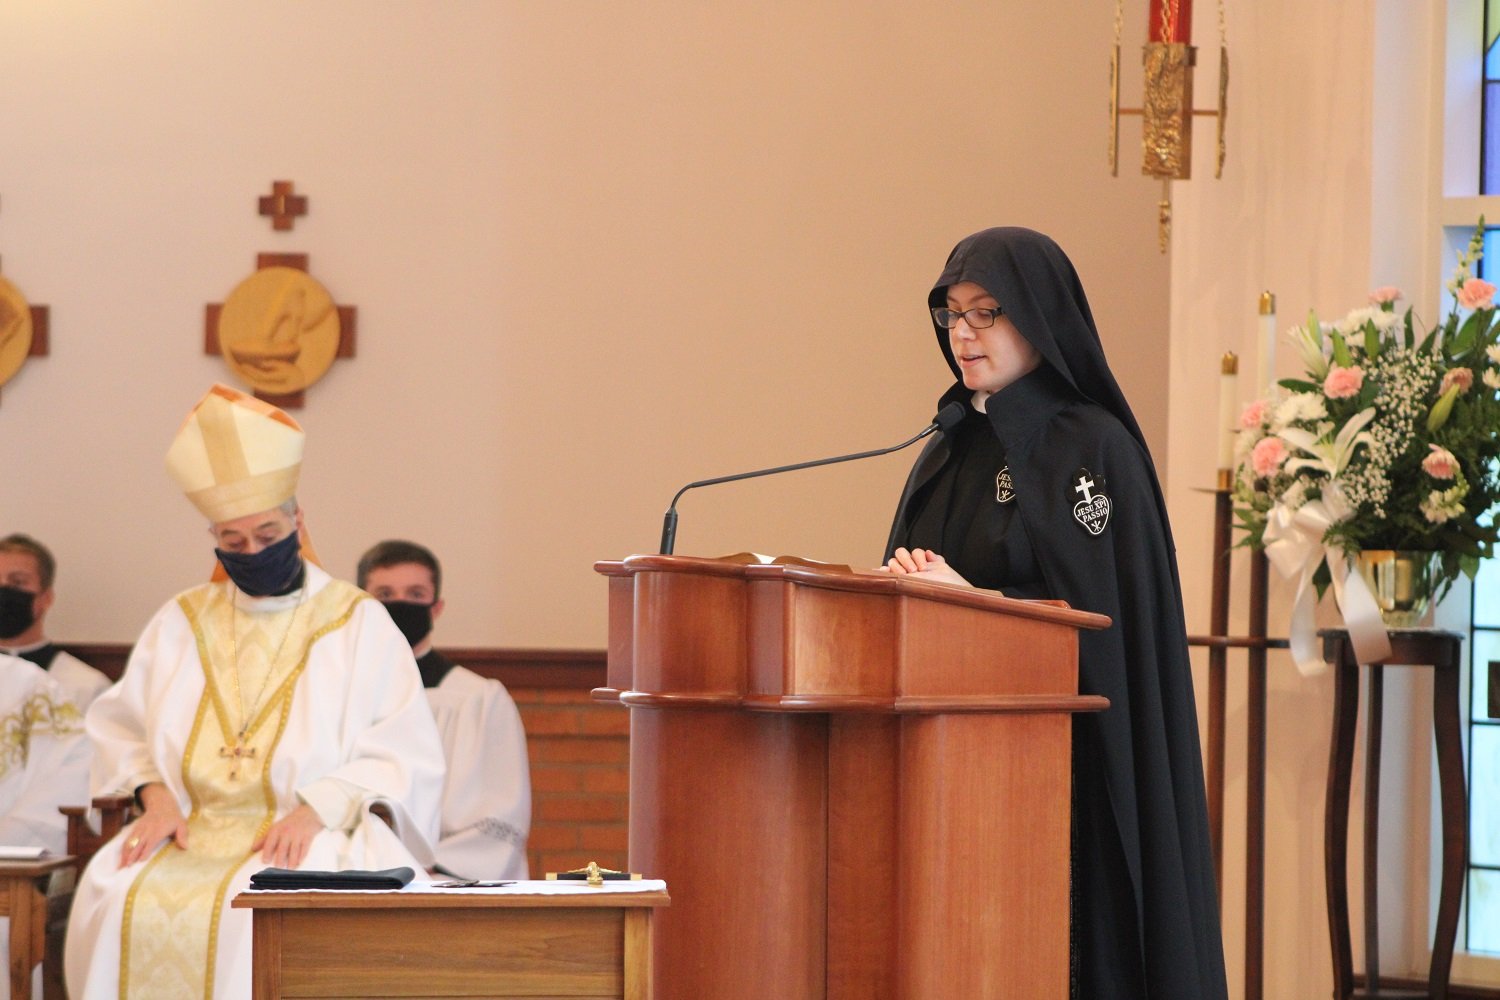  Sr. Maria Faustina, CP, read the First Reading from the Song of Songs 